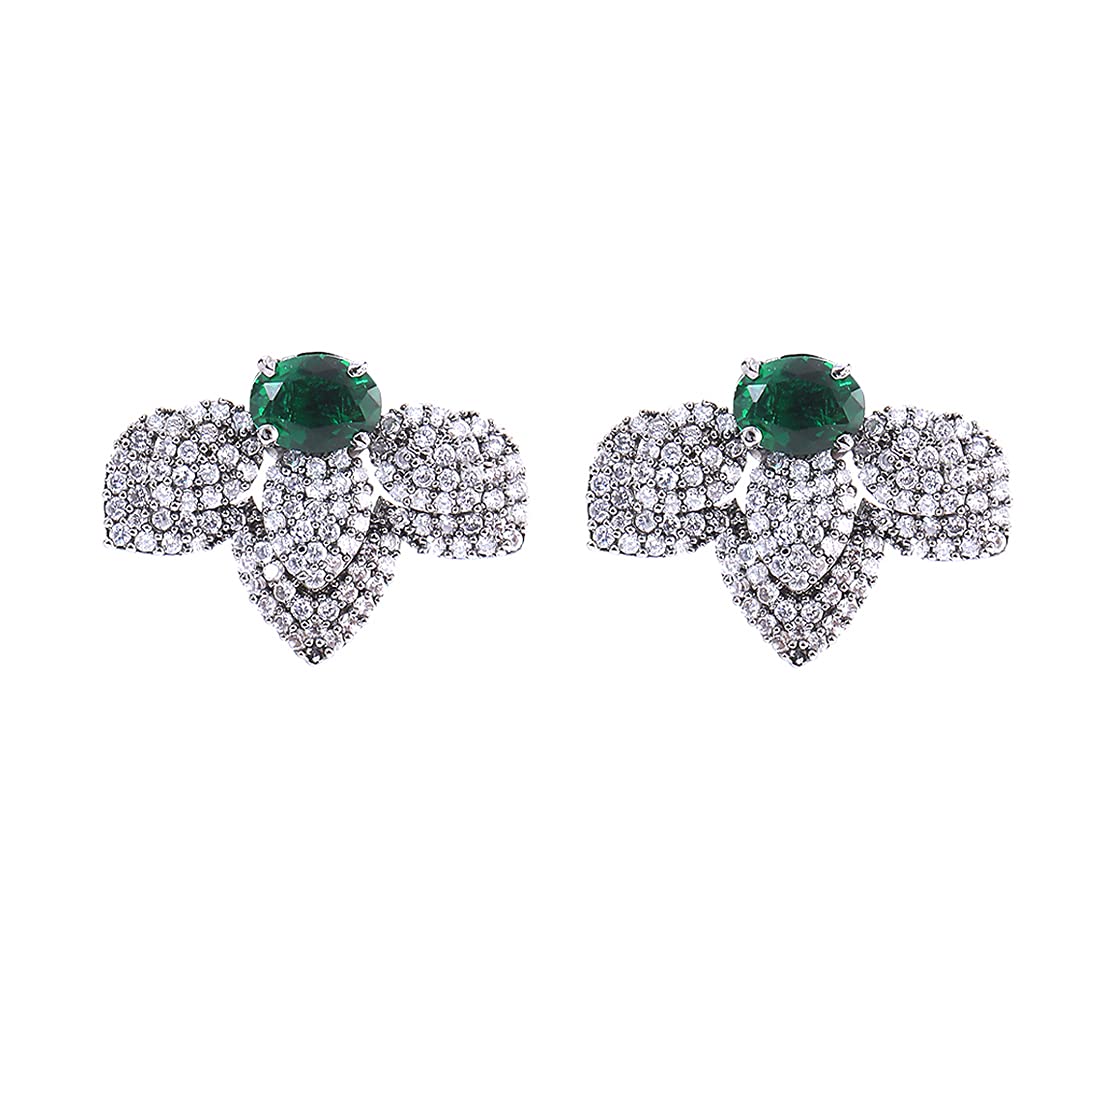 Yellow Chimes Classic AD/American Diamond Studded Black Rhodium Plated Green Flower Stud Earrings for Women and Girls, Medium